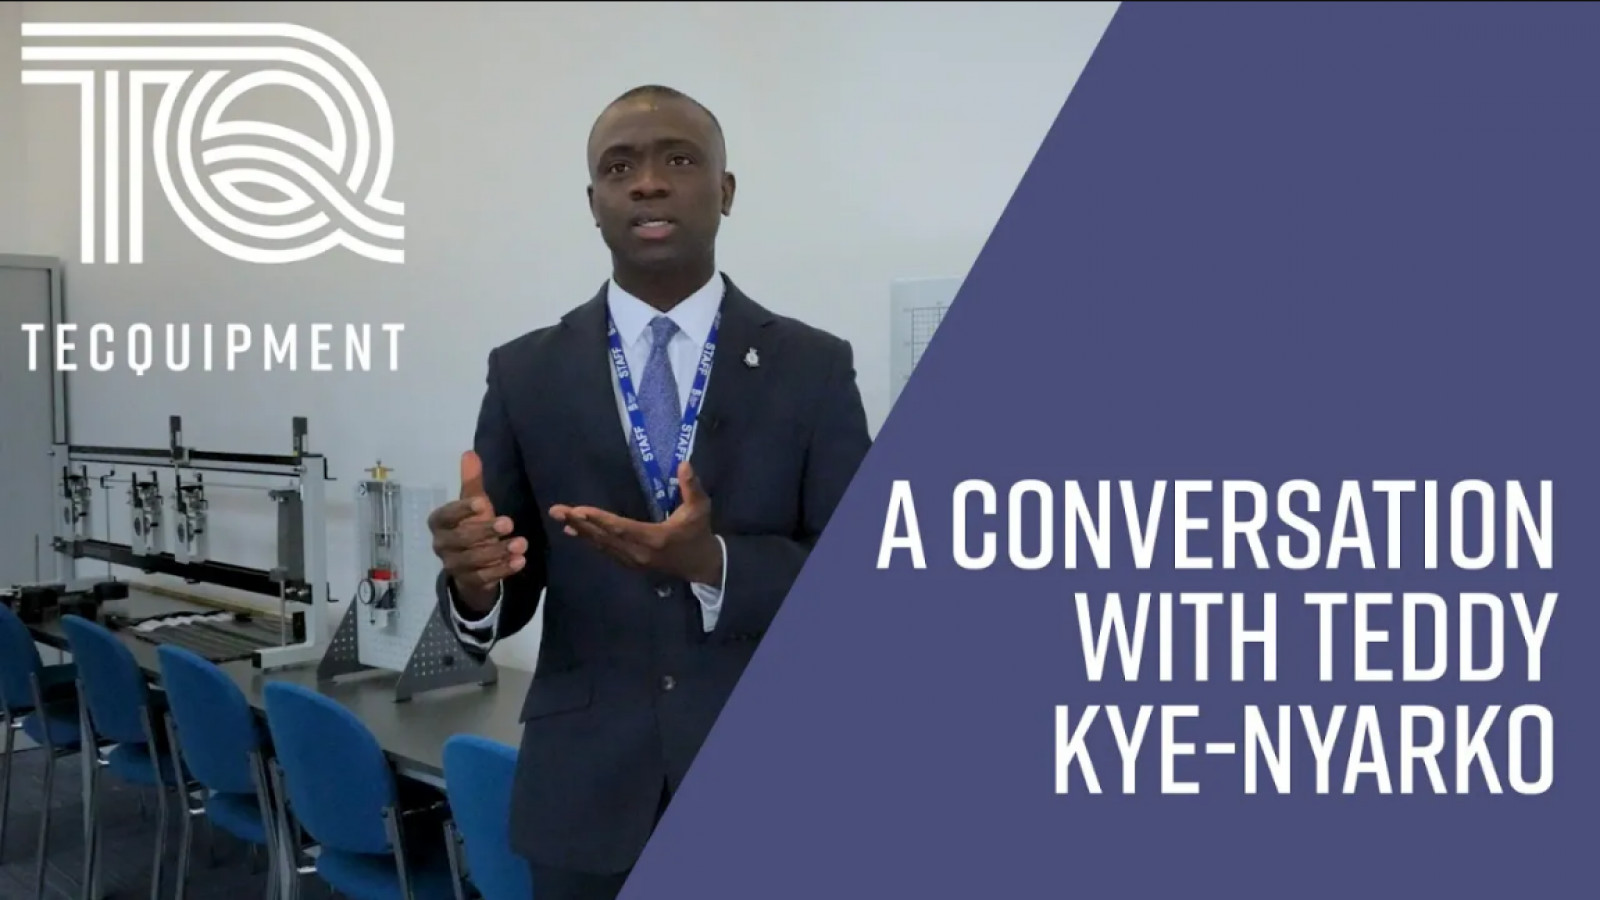 A Conversation with Teddy Kye-Nyarko from Bedford...